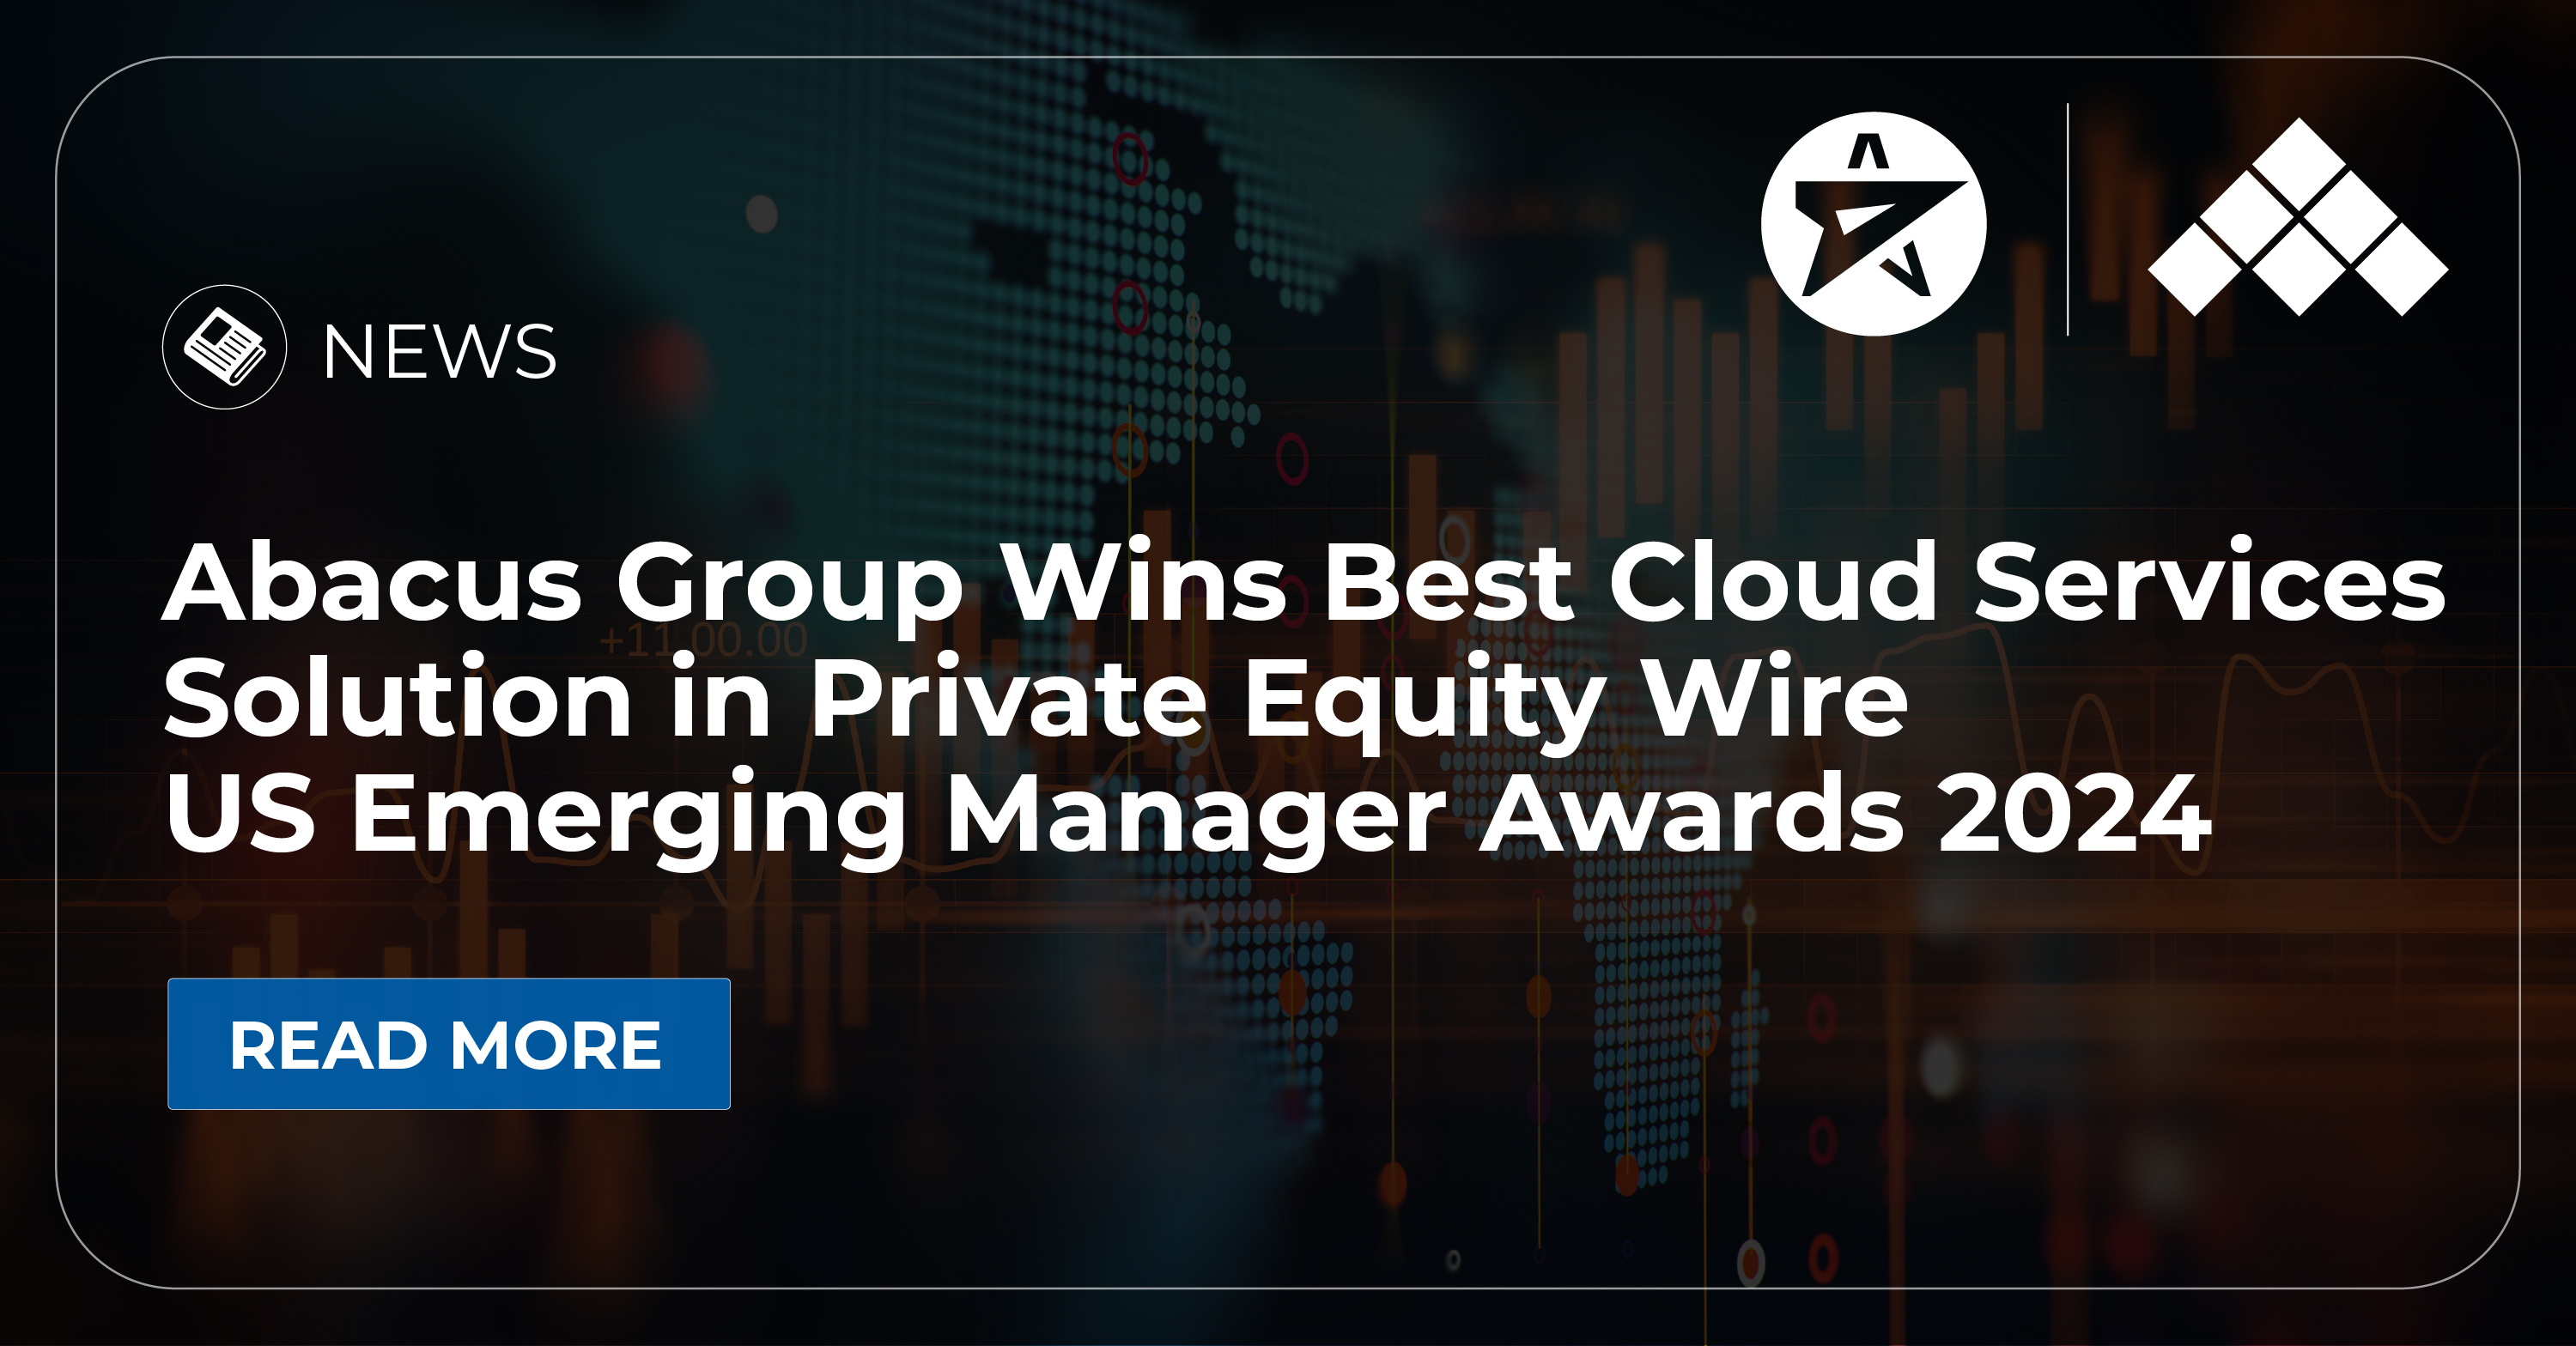 Abacus Group Wins Best Cloud Services Solution in Private Equity Wire US Emerging Manager Awards 2024